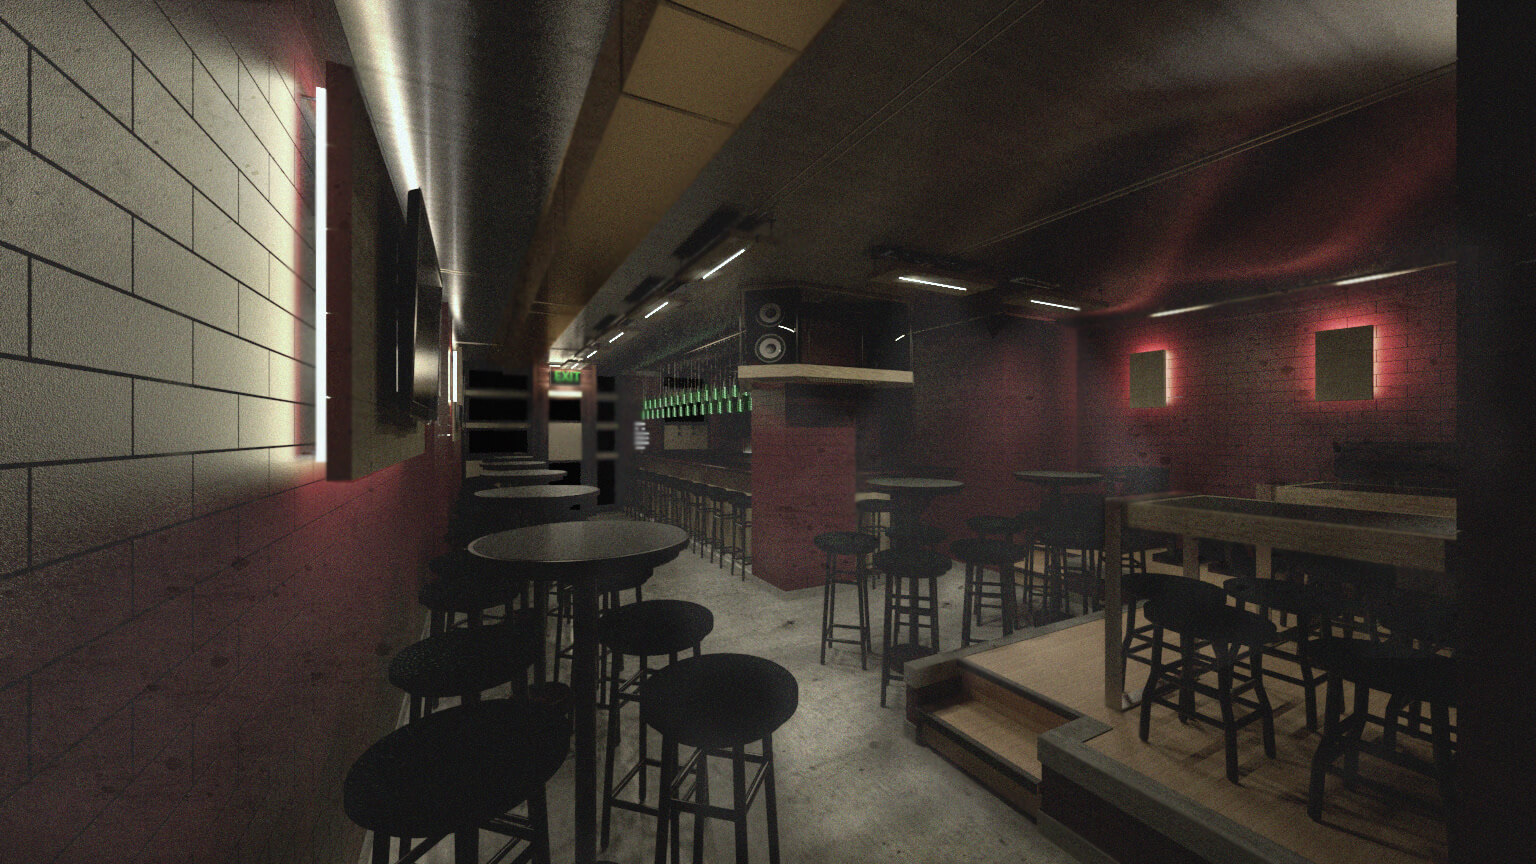 Rendered view from the Interior of the pub showing the furniture, lighting, bar, and architectural layout design